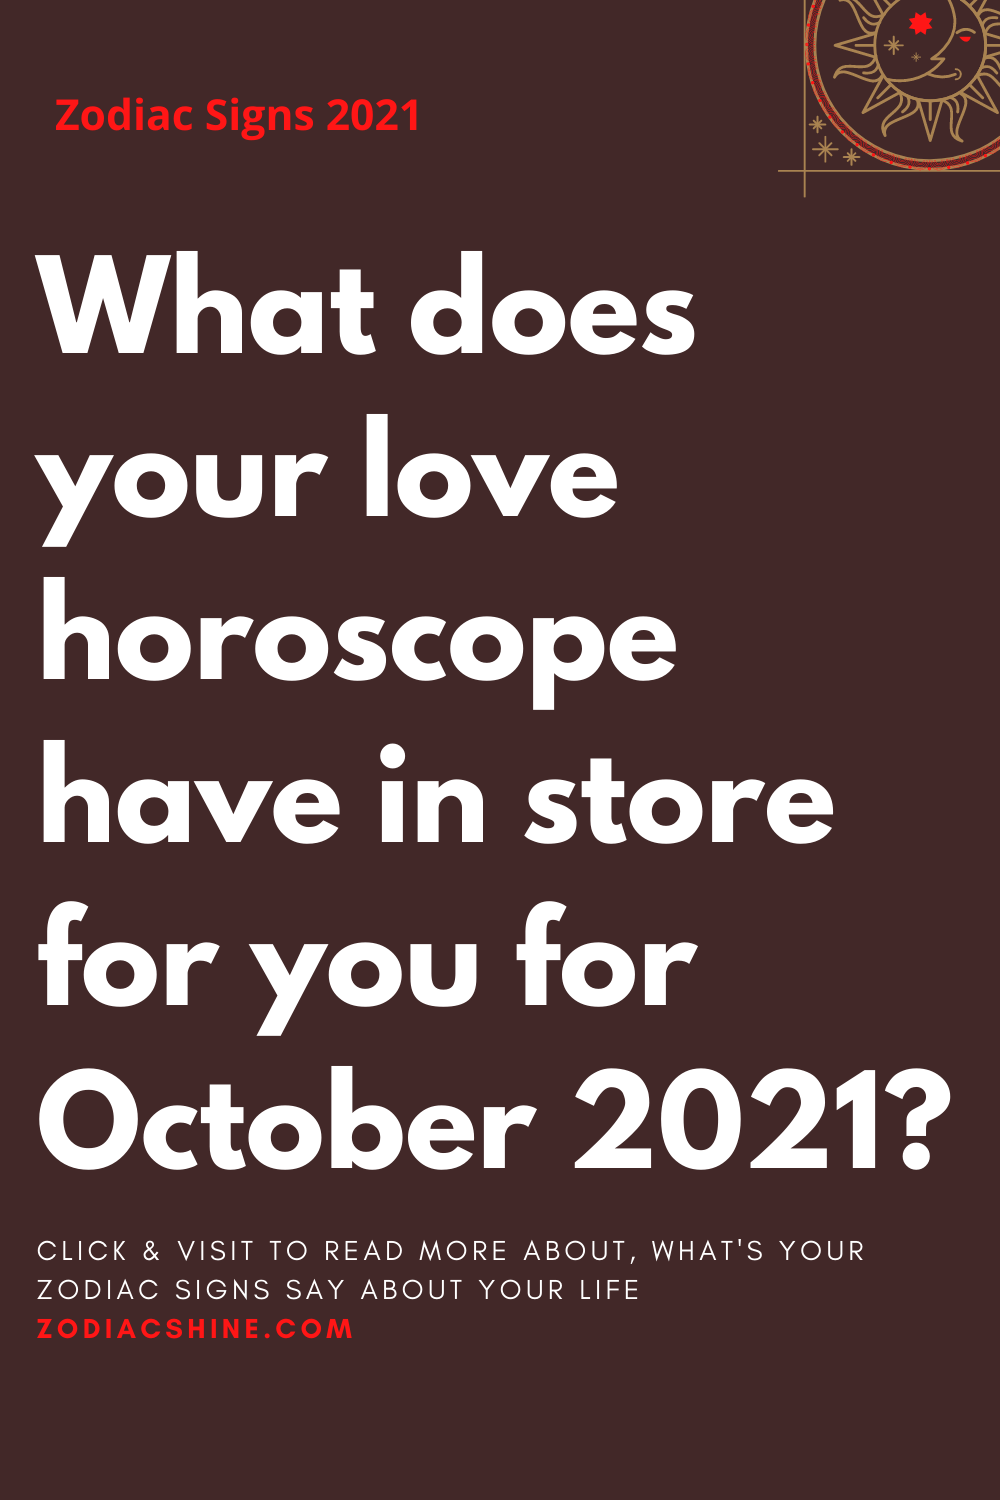 What does your love horoscope have in store for you for October 2021?